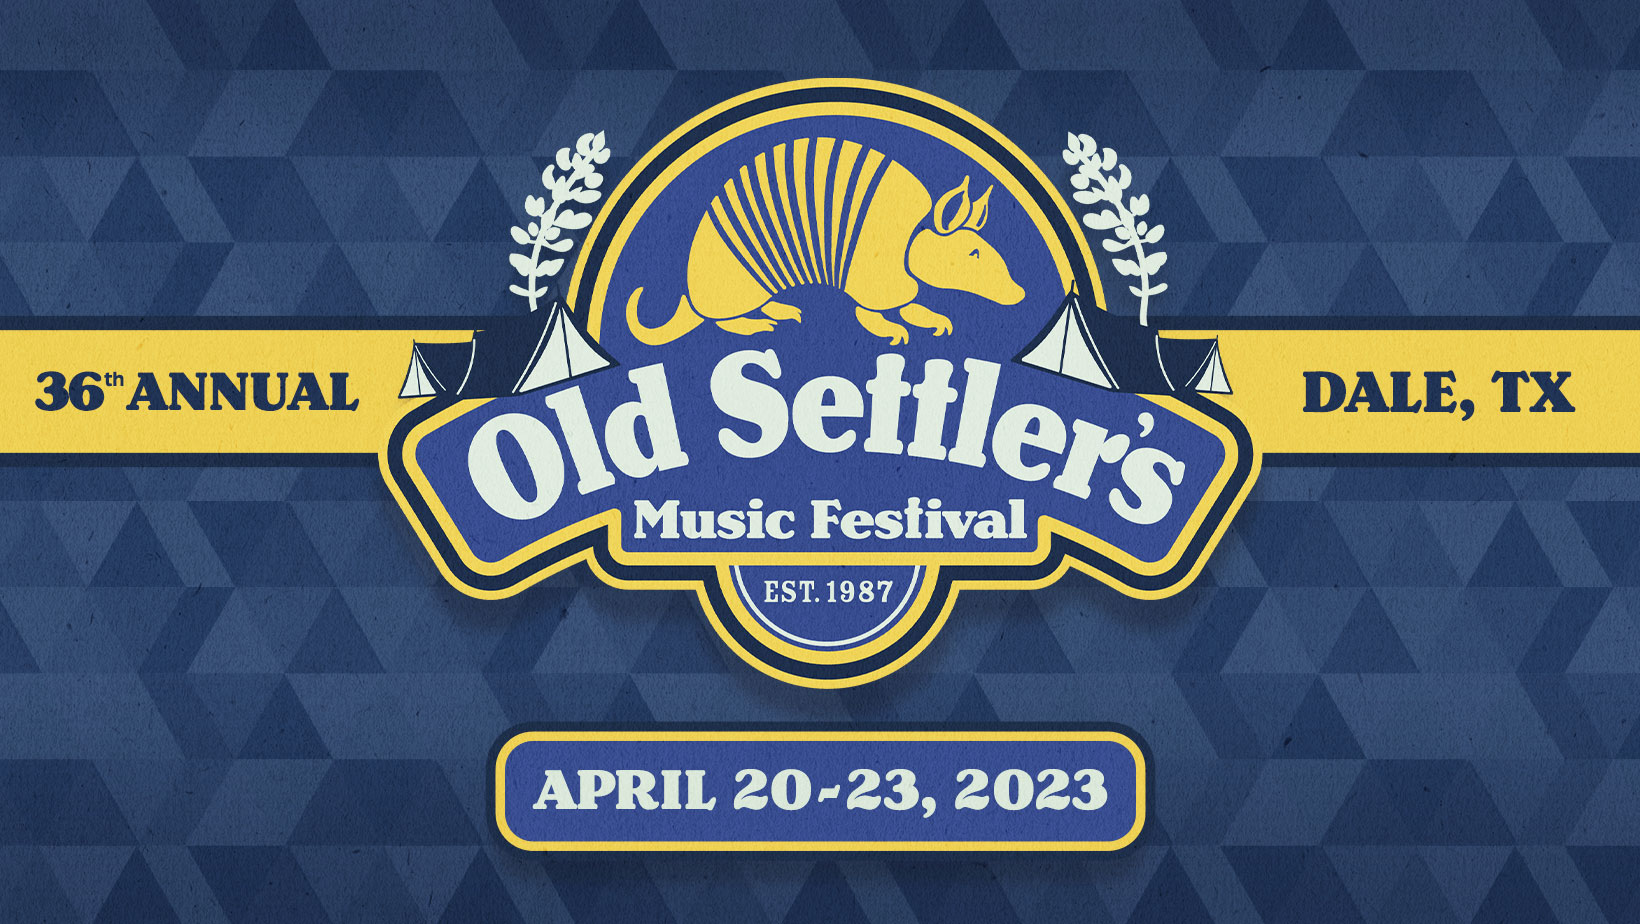 Old Settler’s Music Festival announces online auction taking place March 13 - 17, ahead of their 36th annual event